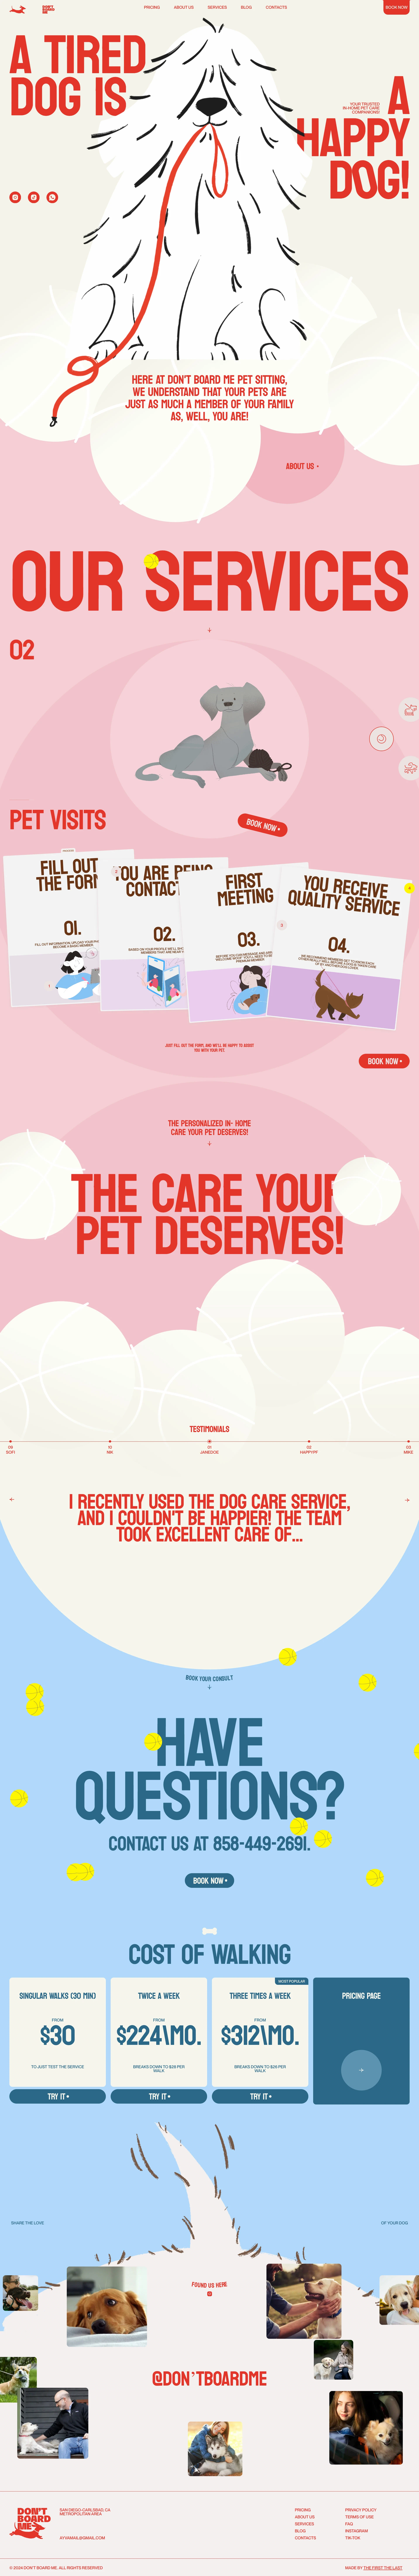 Don’t Board Me Landing Page Example: We specialize in providing reliable, compassionate, and personalized in-home pet care services tailored to meet the unique needs of your furry friends.